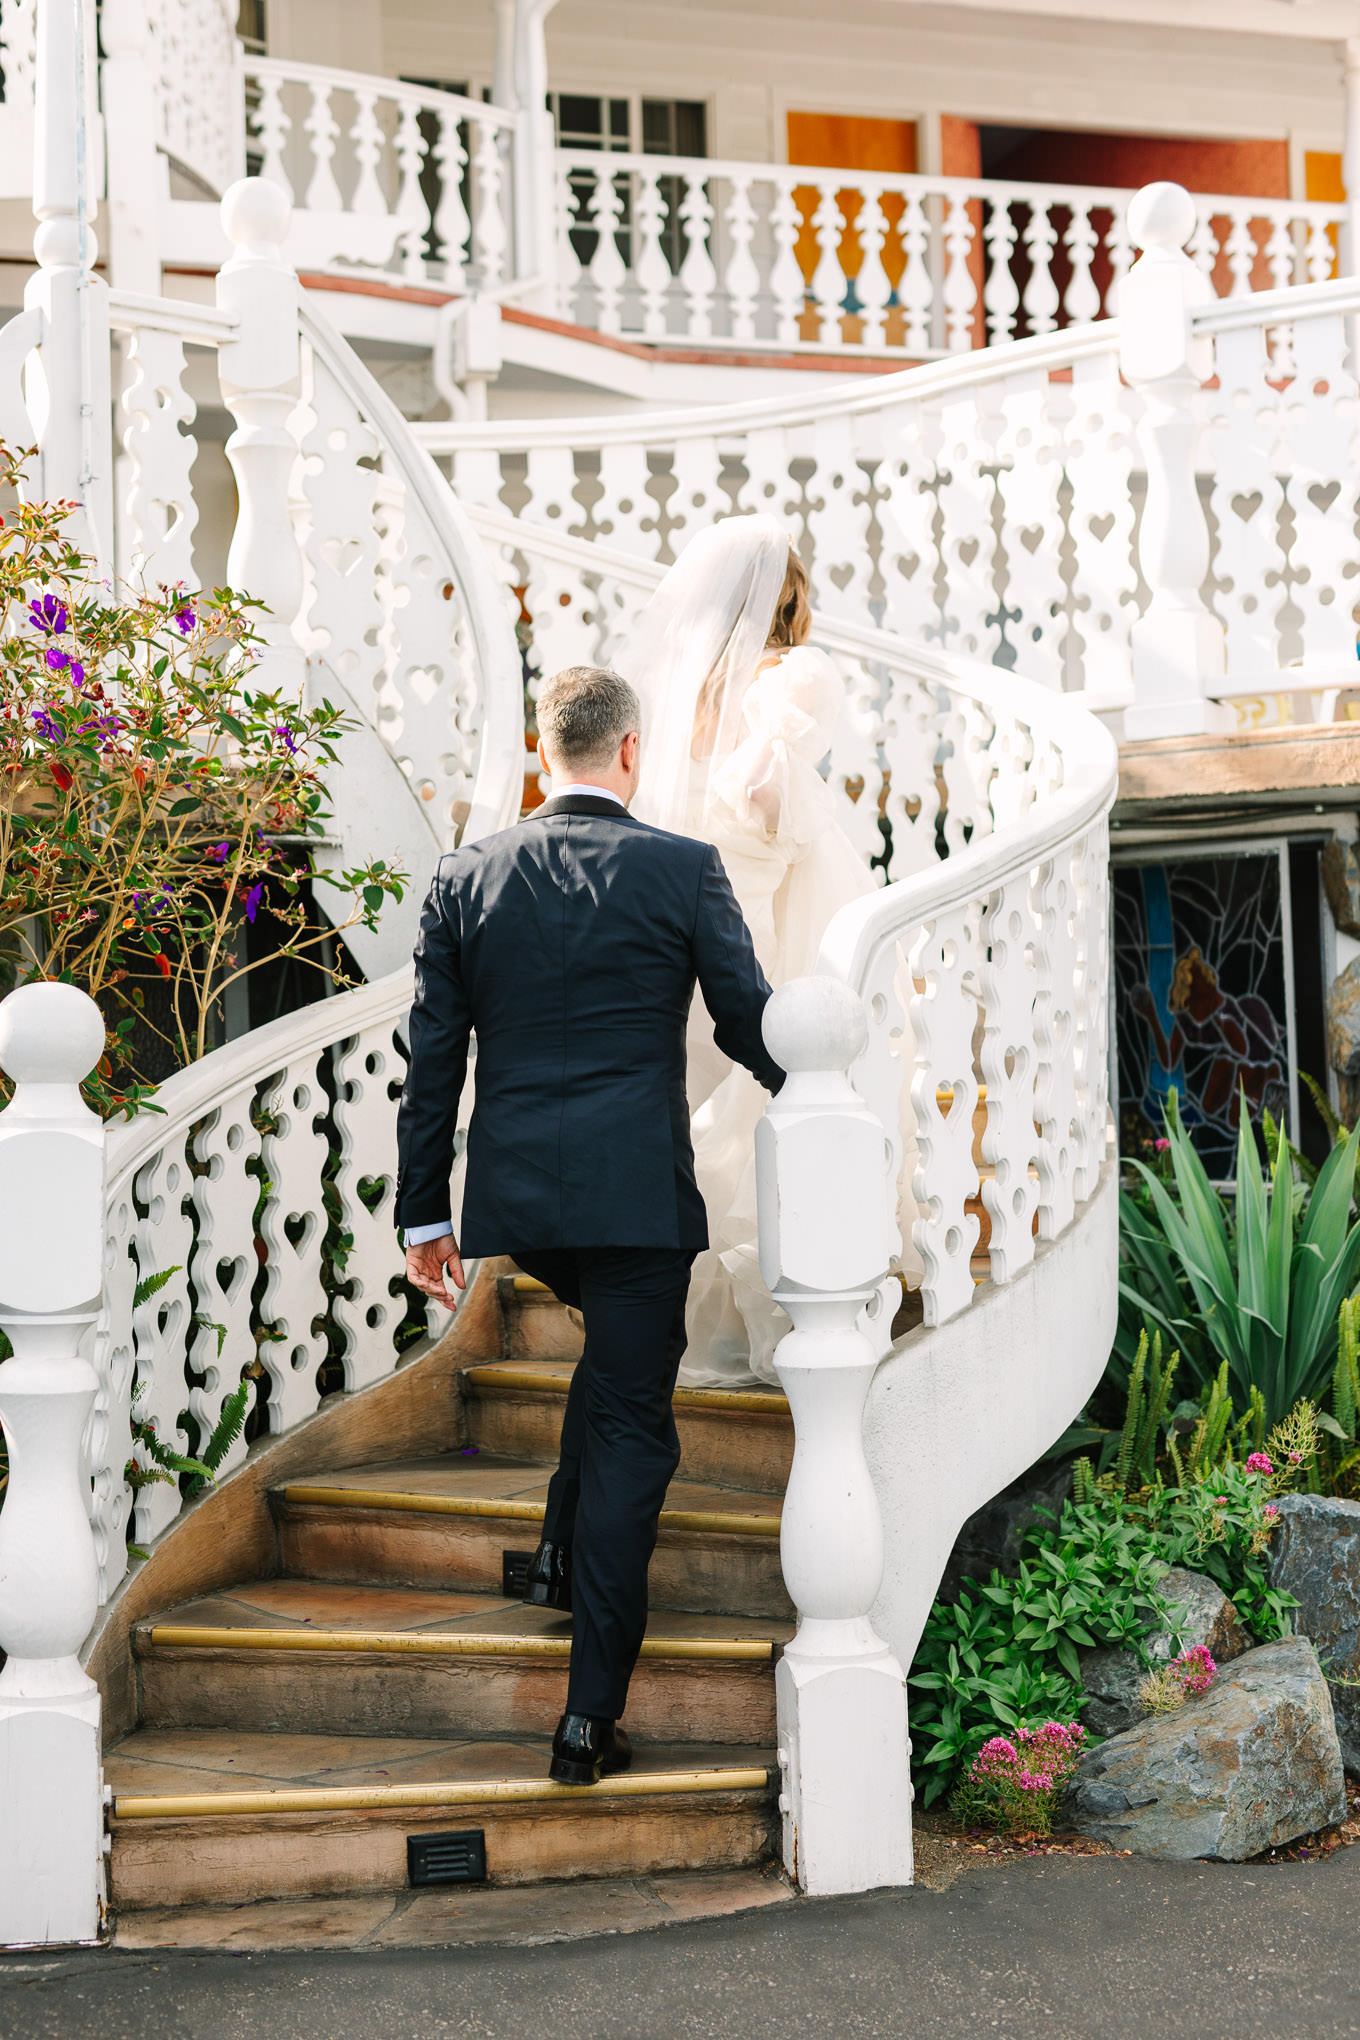 First look with Allison Harvard and Jeremy Burke at the Madonna Inn | Colorful and quirky wedding at Higuera Ranch in San Luis Obispo | #sanluisobispowedding #californiawedding #higueraranch #madonnainn   
Source: Mary Costa Photography | Los Angeles